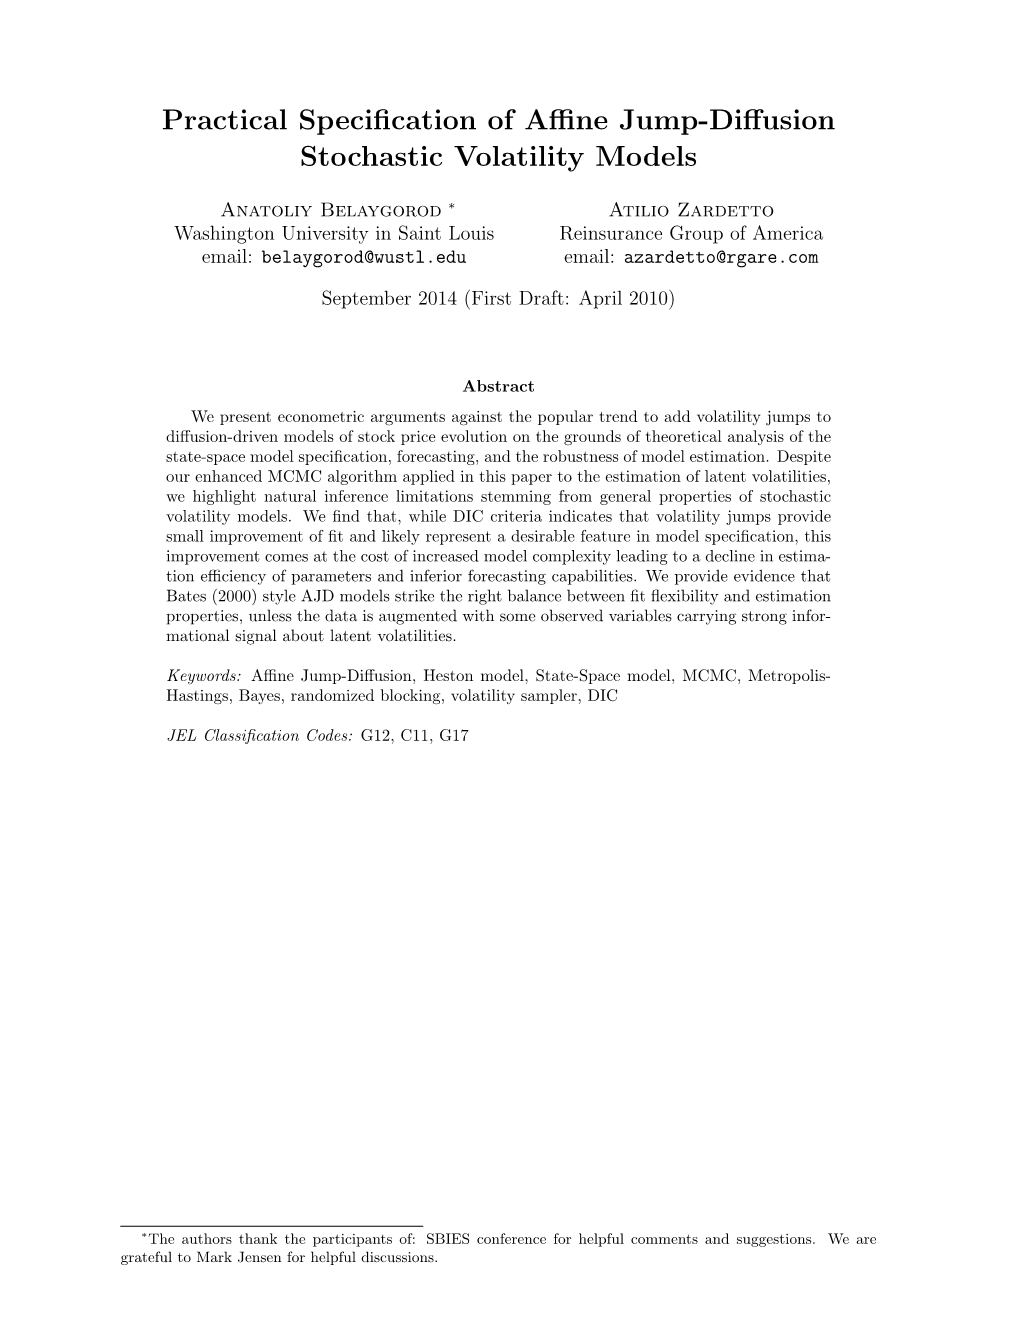 Practical Specification of Affine Jump-Diffusion Stochastic Volatility